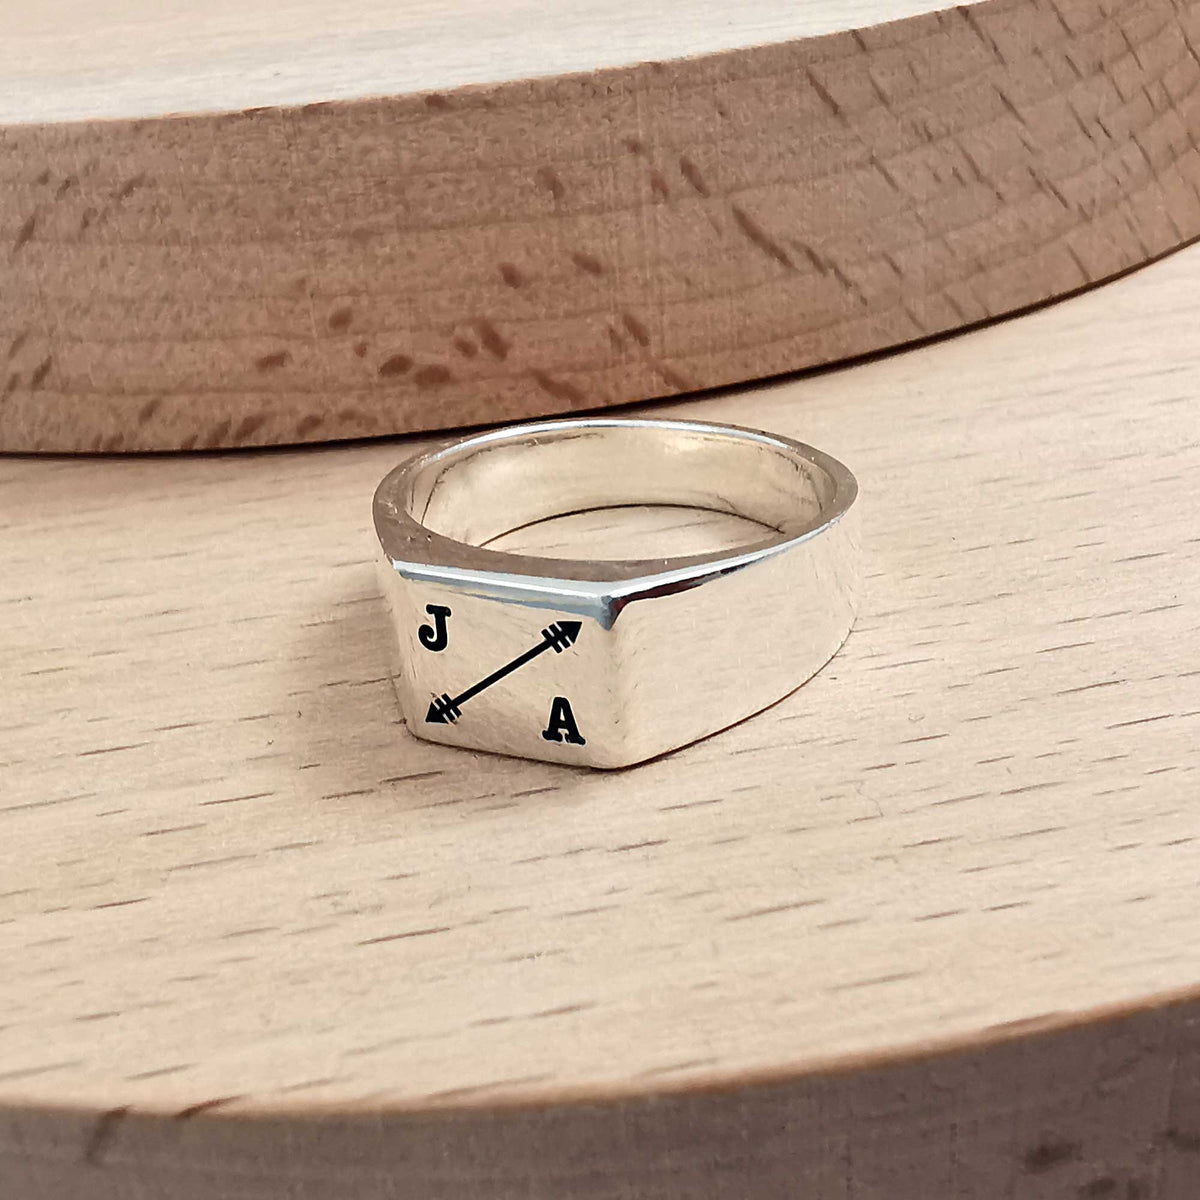 mens signet ring engraved with initials and arrow symbol